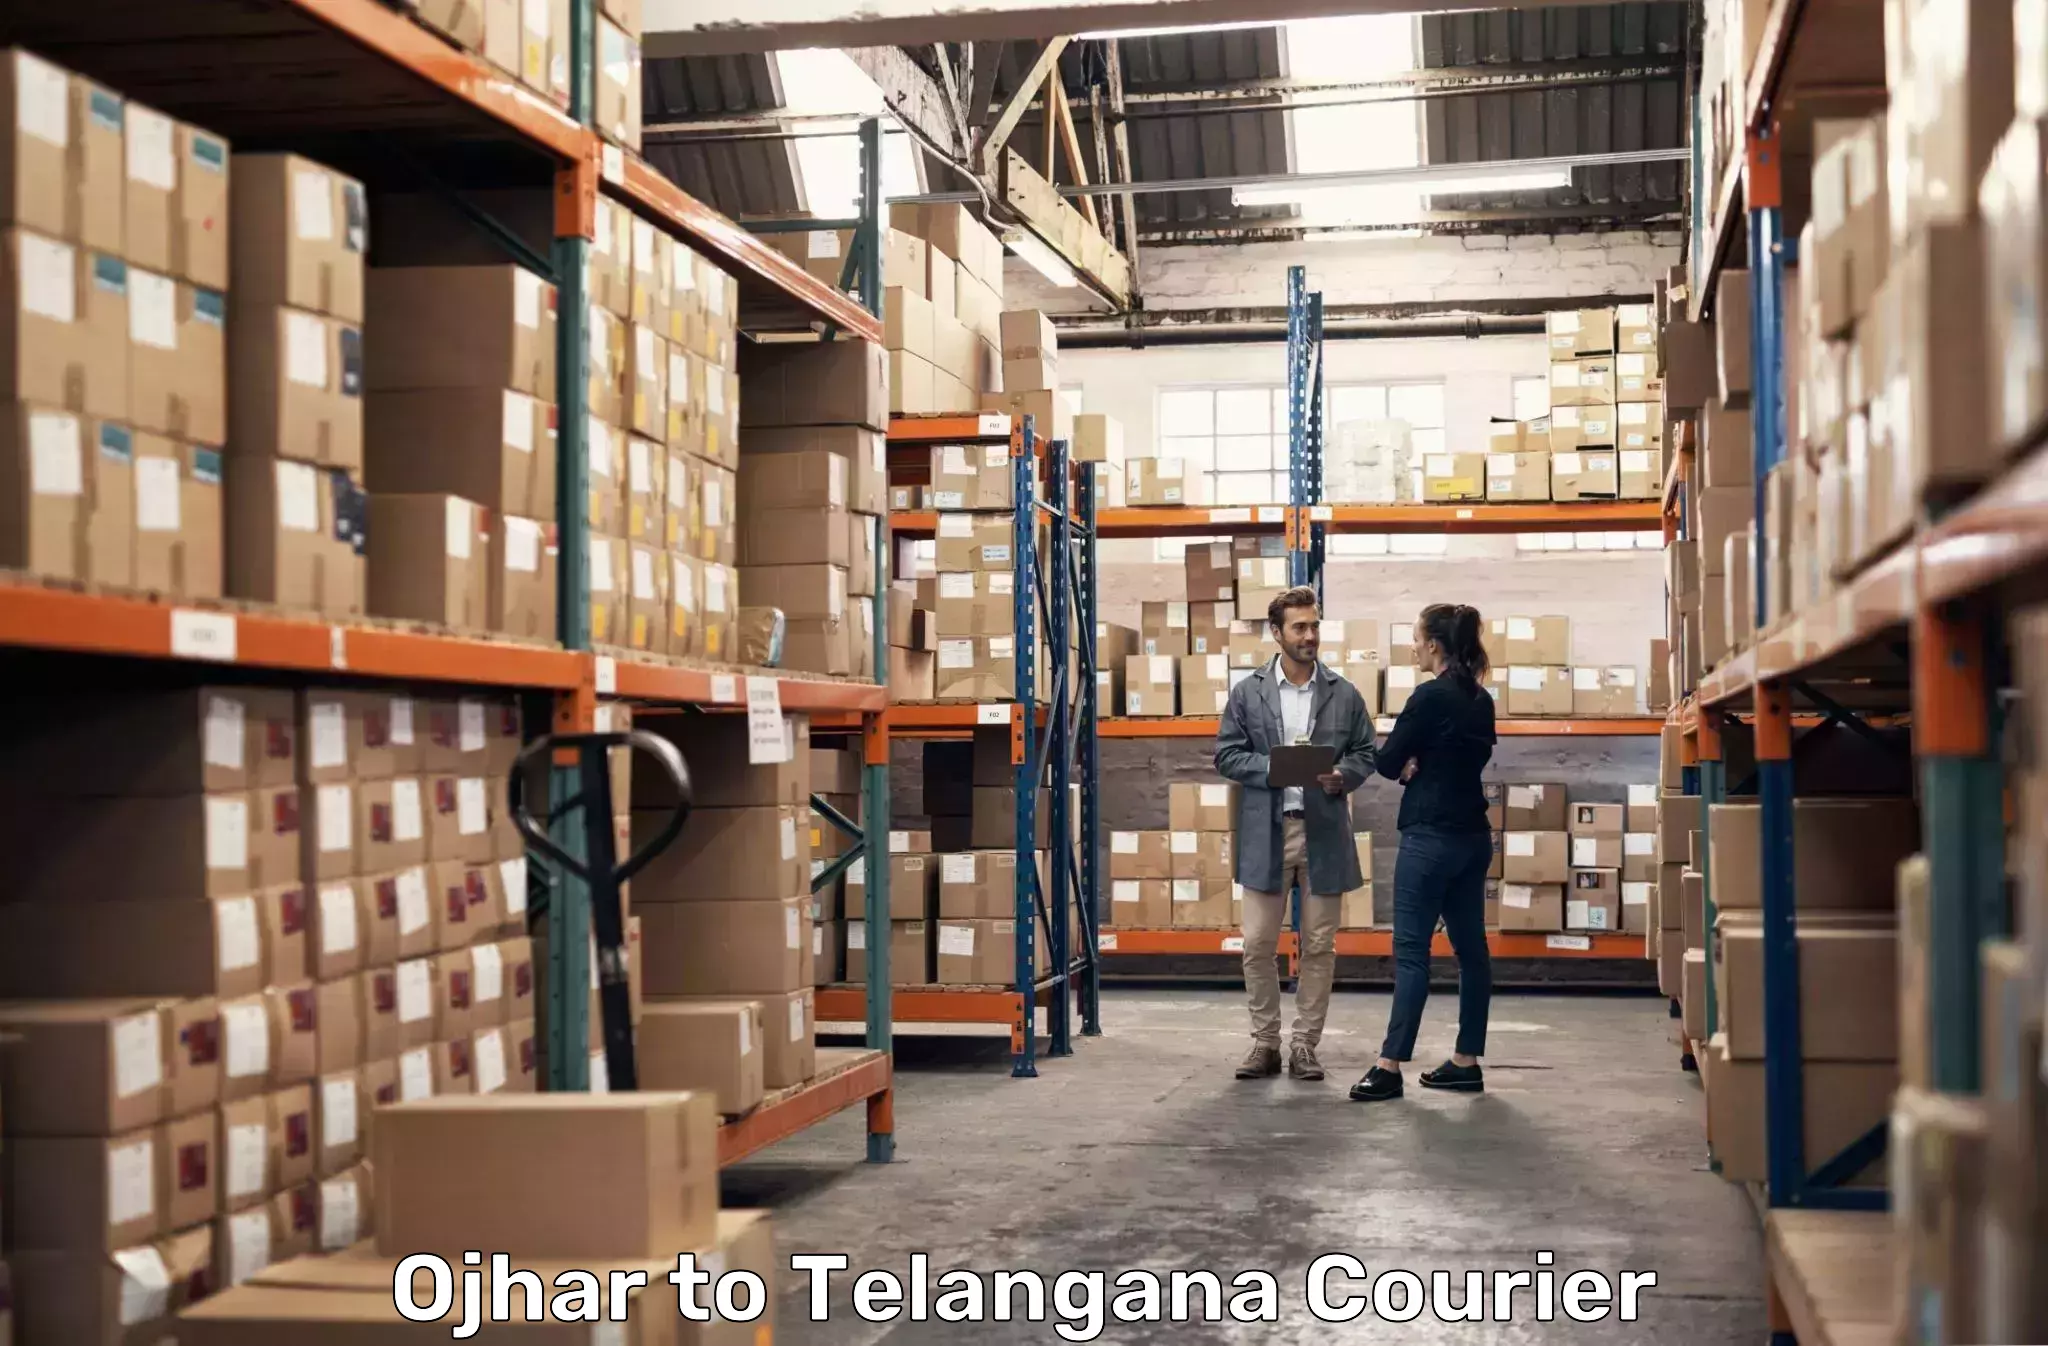 Efficient courier operations in Ojhar to Telangana